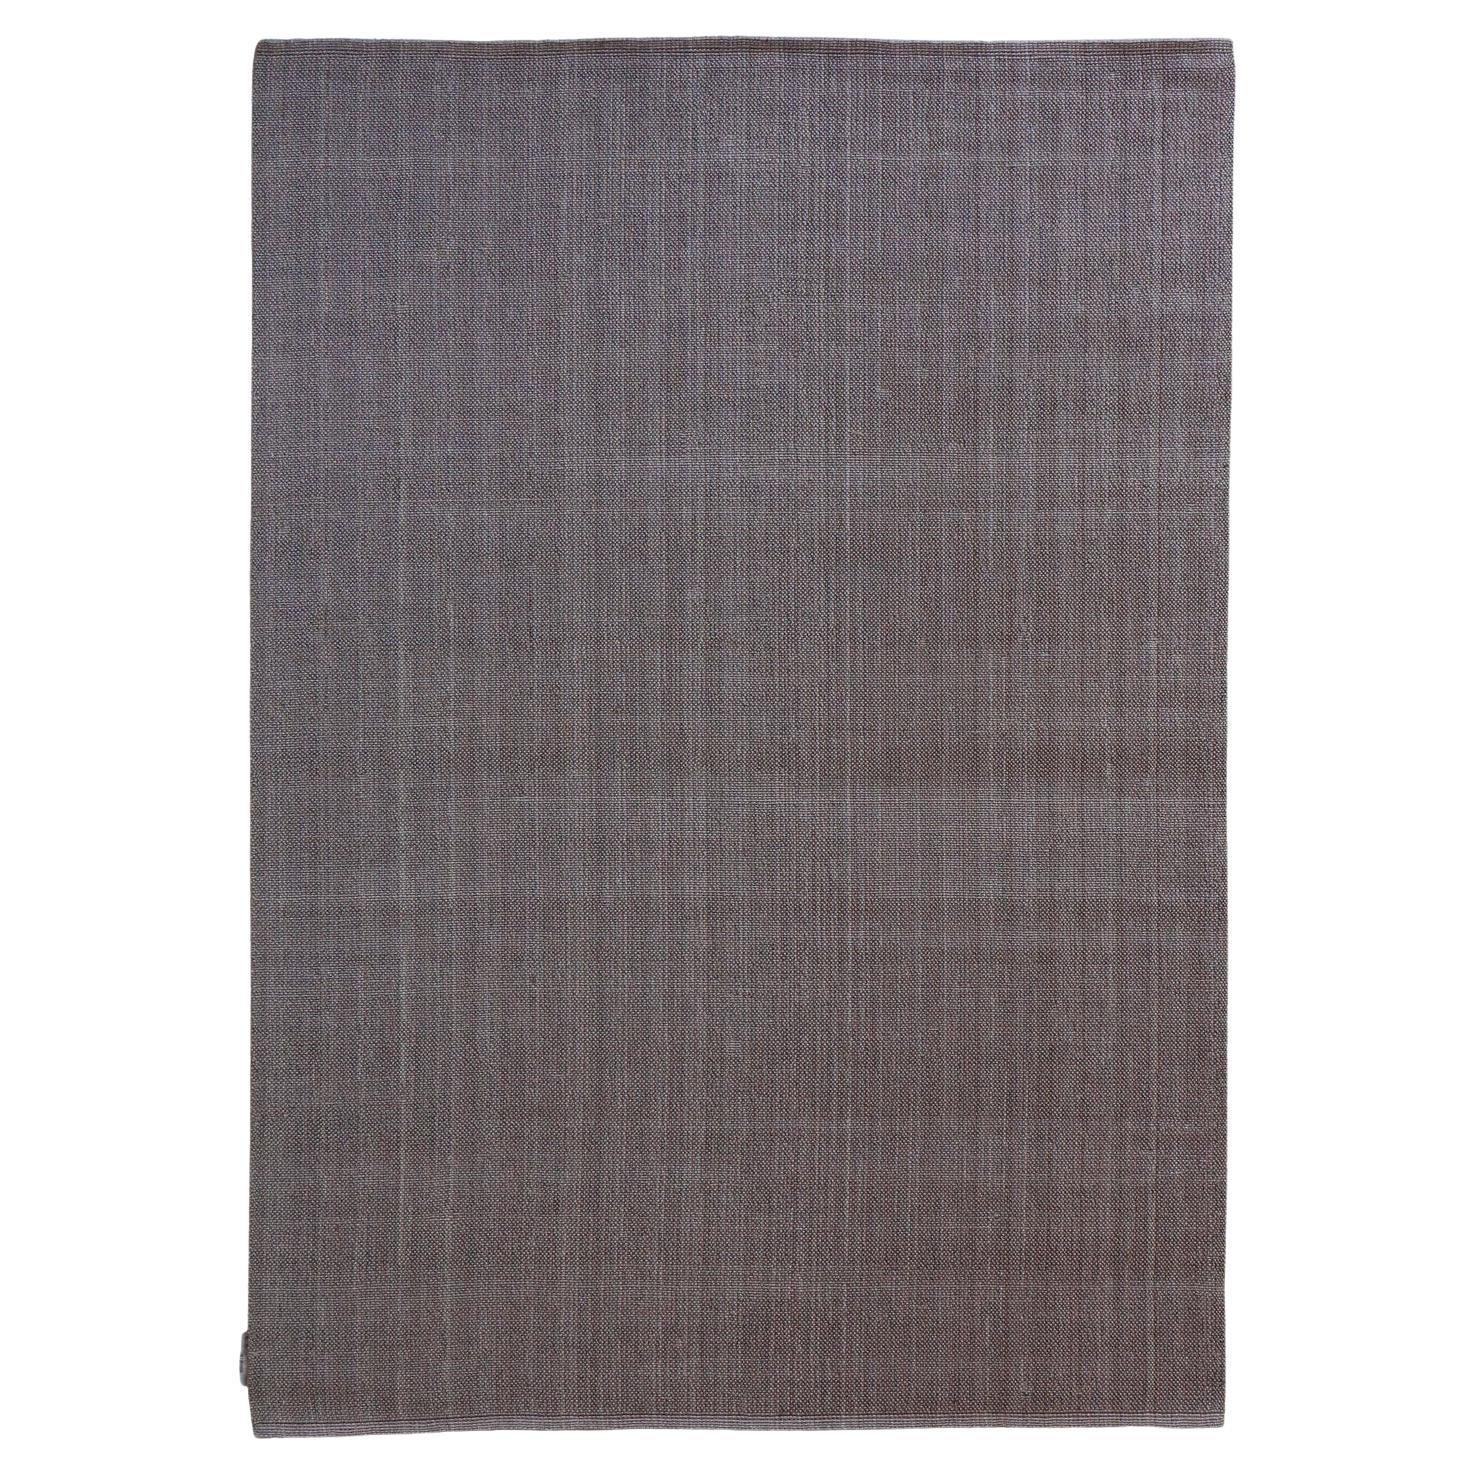 Contemporary Design Grey Lilac Rug by Deanna Comellini In Stock 170x240 cm